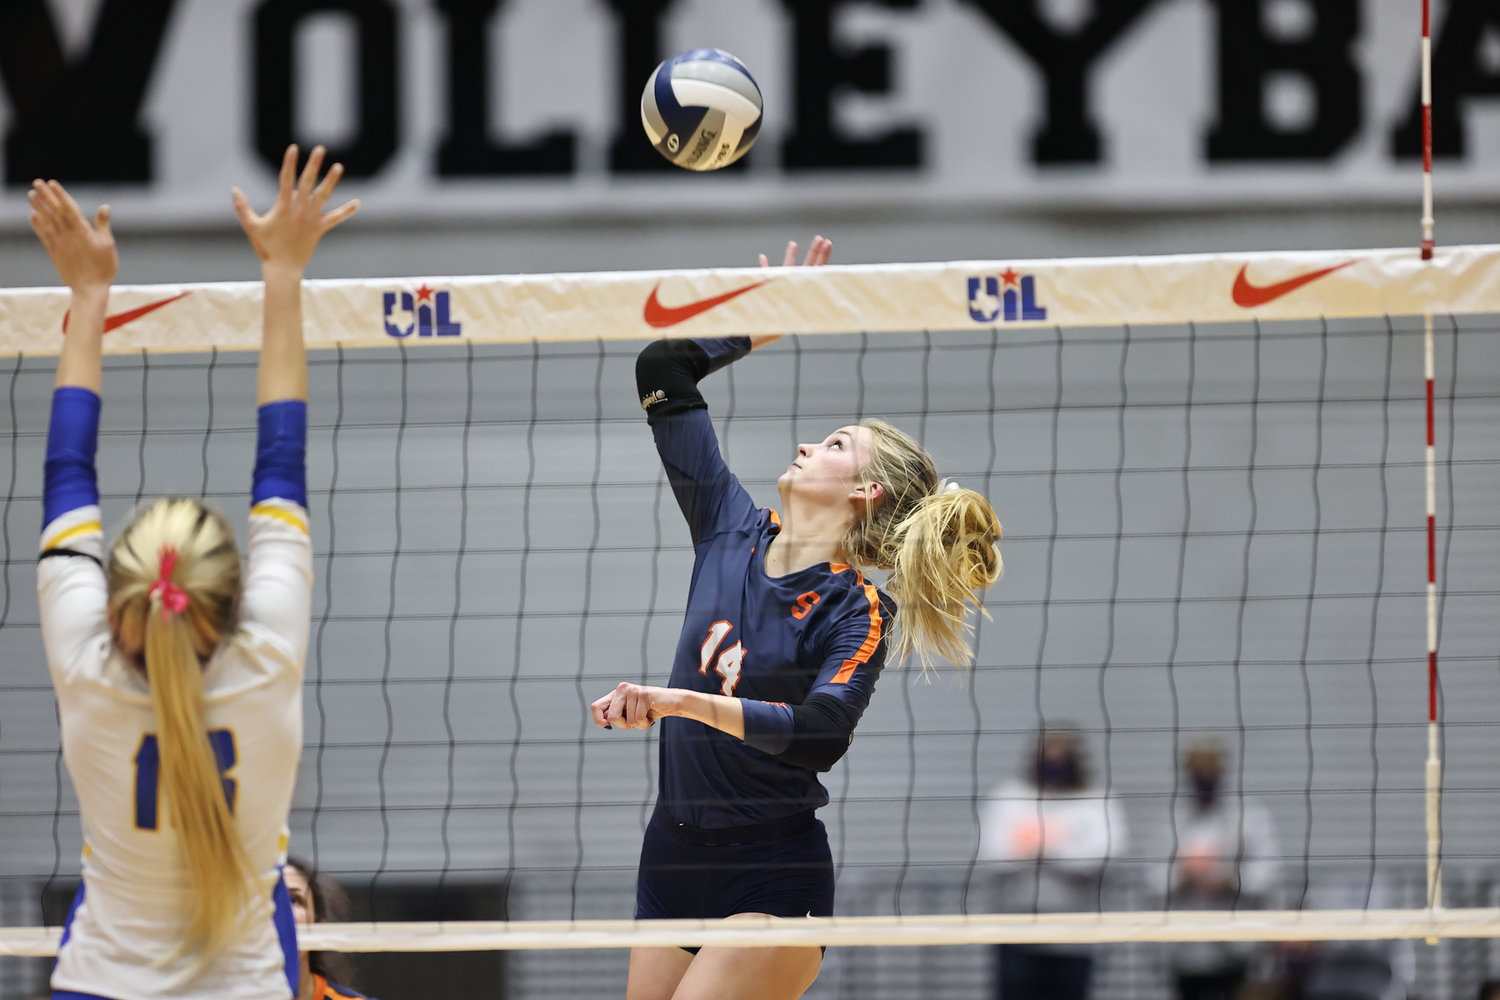 Seven Lakes' Ally Batenhorst finished her 2020 season with 574 kills, 371 digs, 33 blocks and 32 aces in 87 sets.